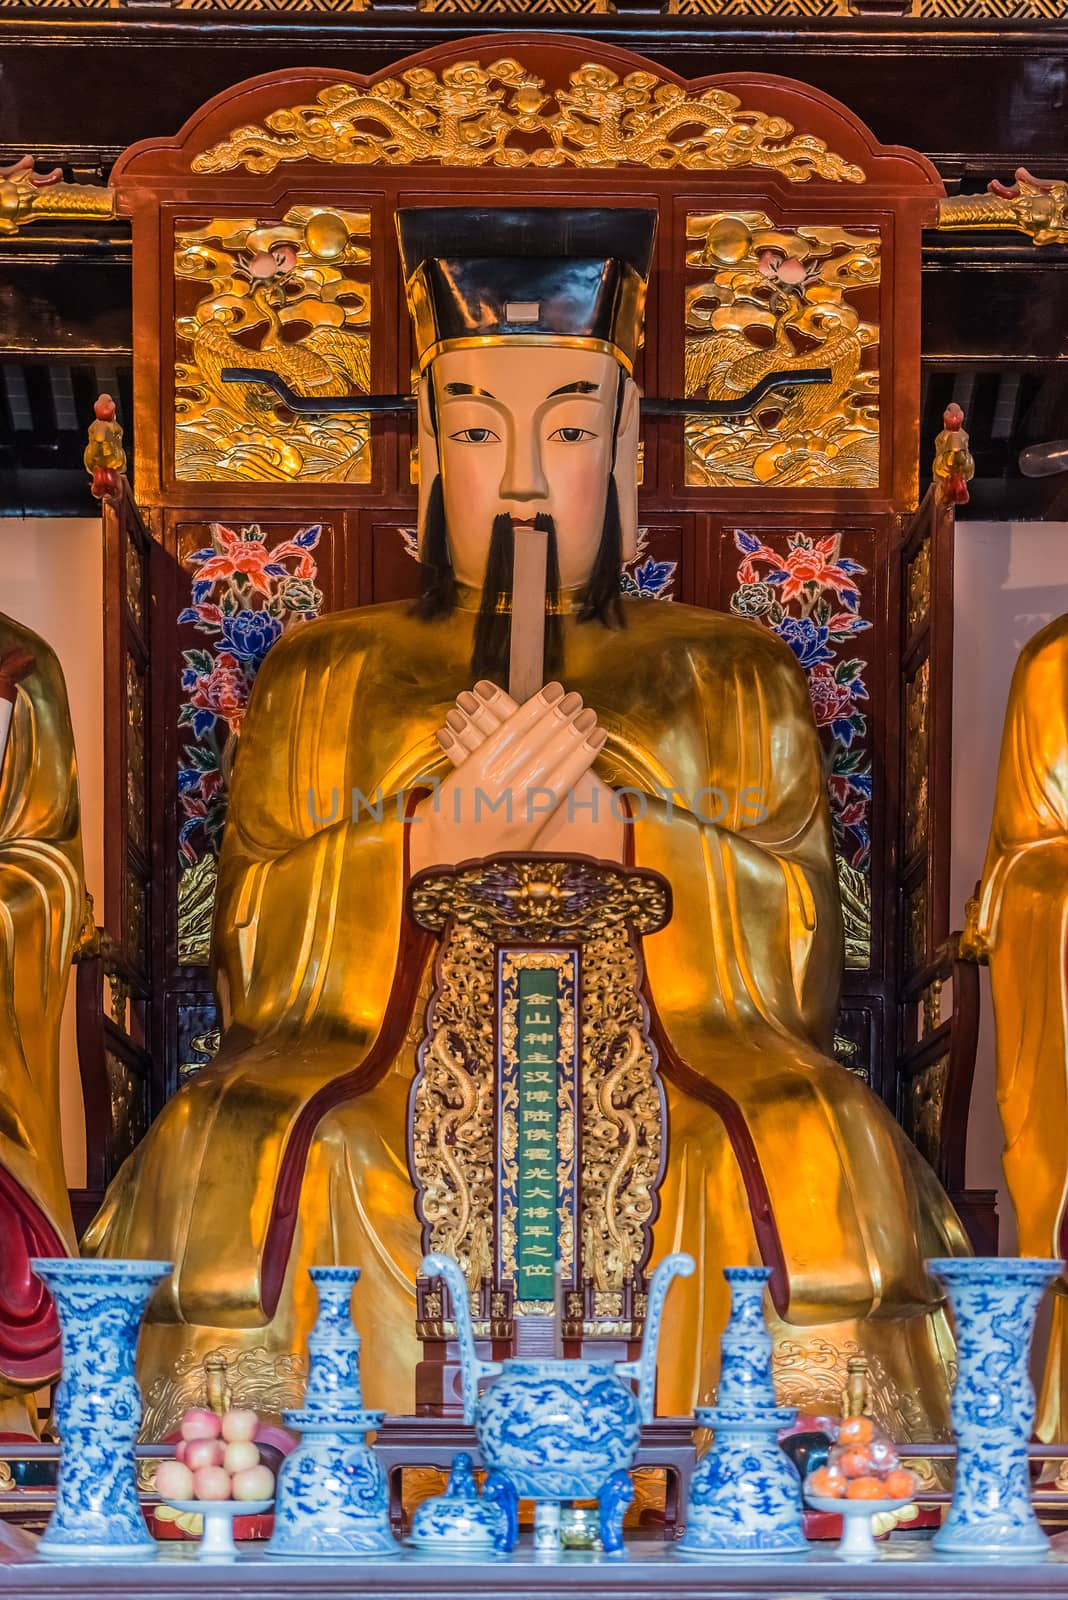 Shanghai, China - April 7, 2013: statues in the city god temple Chenghuang Miao at the city of Shanghai in China on april 7th, 2013